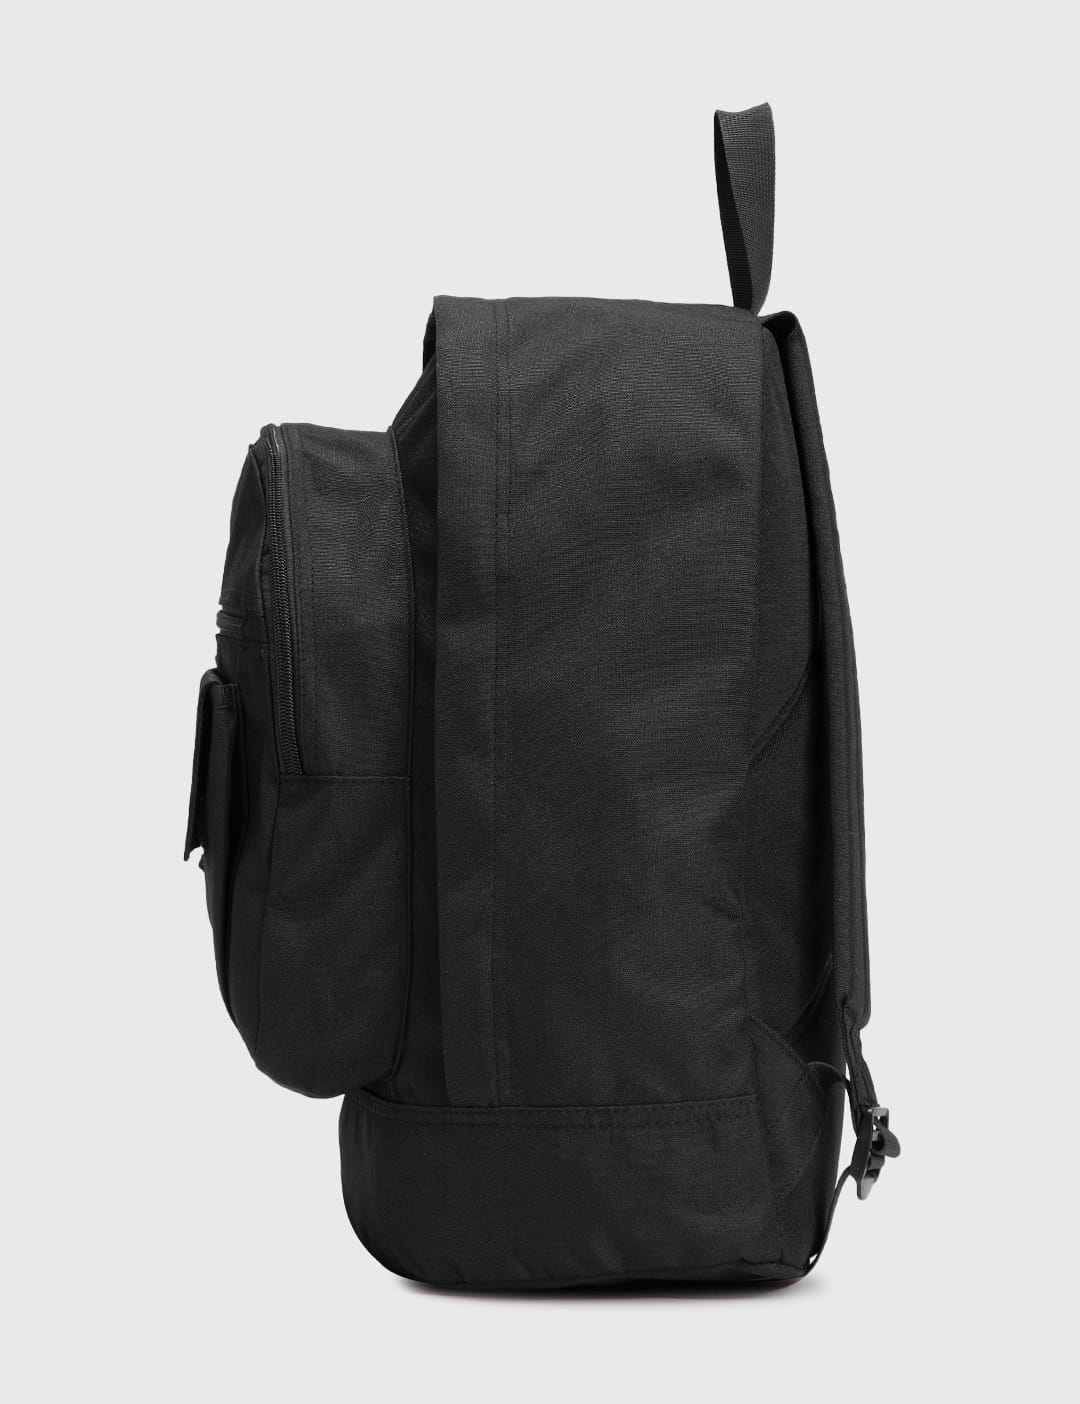 BoTT - School Backpack | HBX - Globally Curated Fashion and